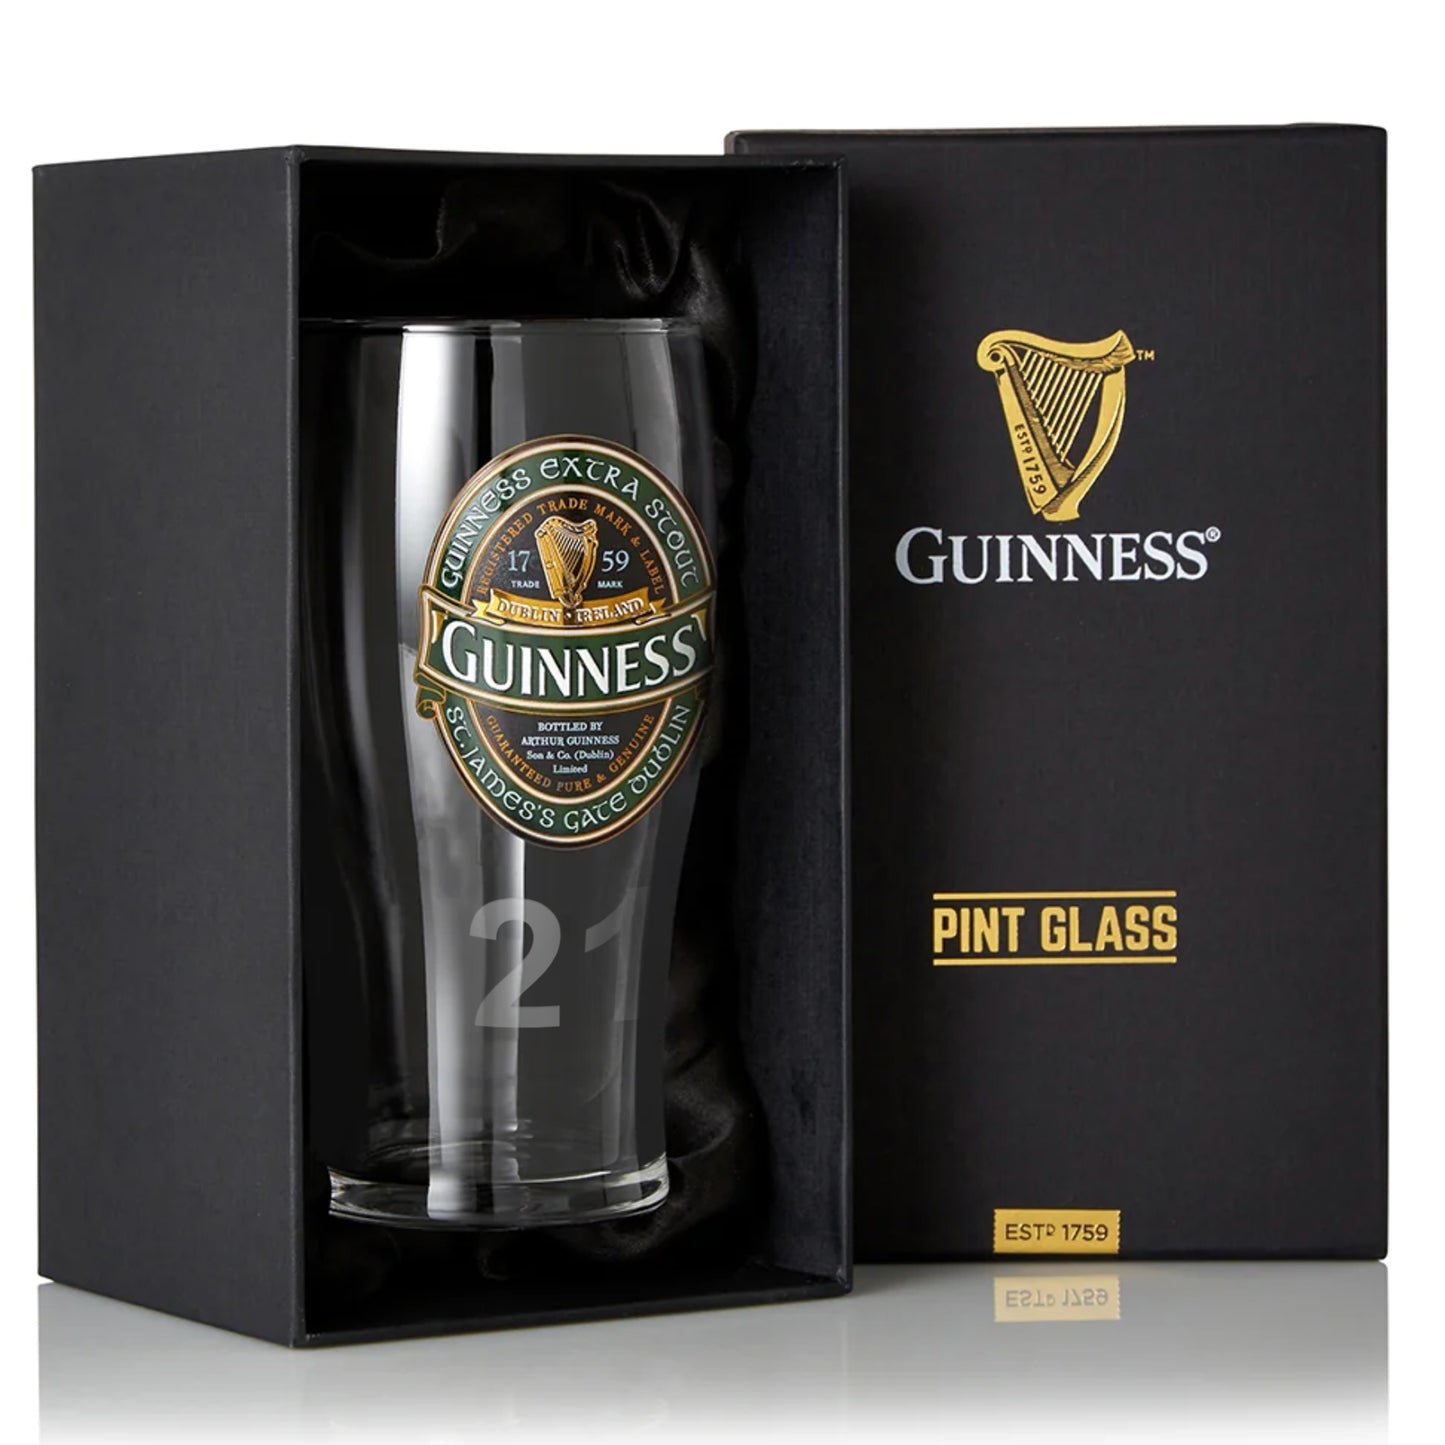 Guinness Ireland Collection pint glass in a box, perfect for any beer lover or collector. This authentic piece from Ireland is a must-have for all Guinness enthusiasts. The high-quality glass showcases the iconic Guinness logo and